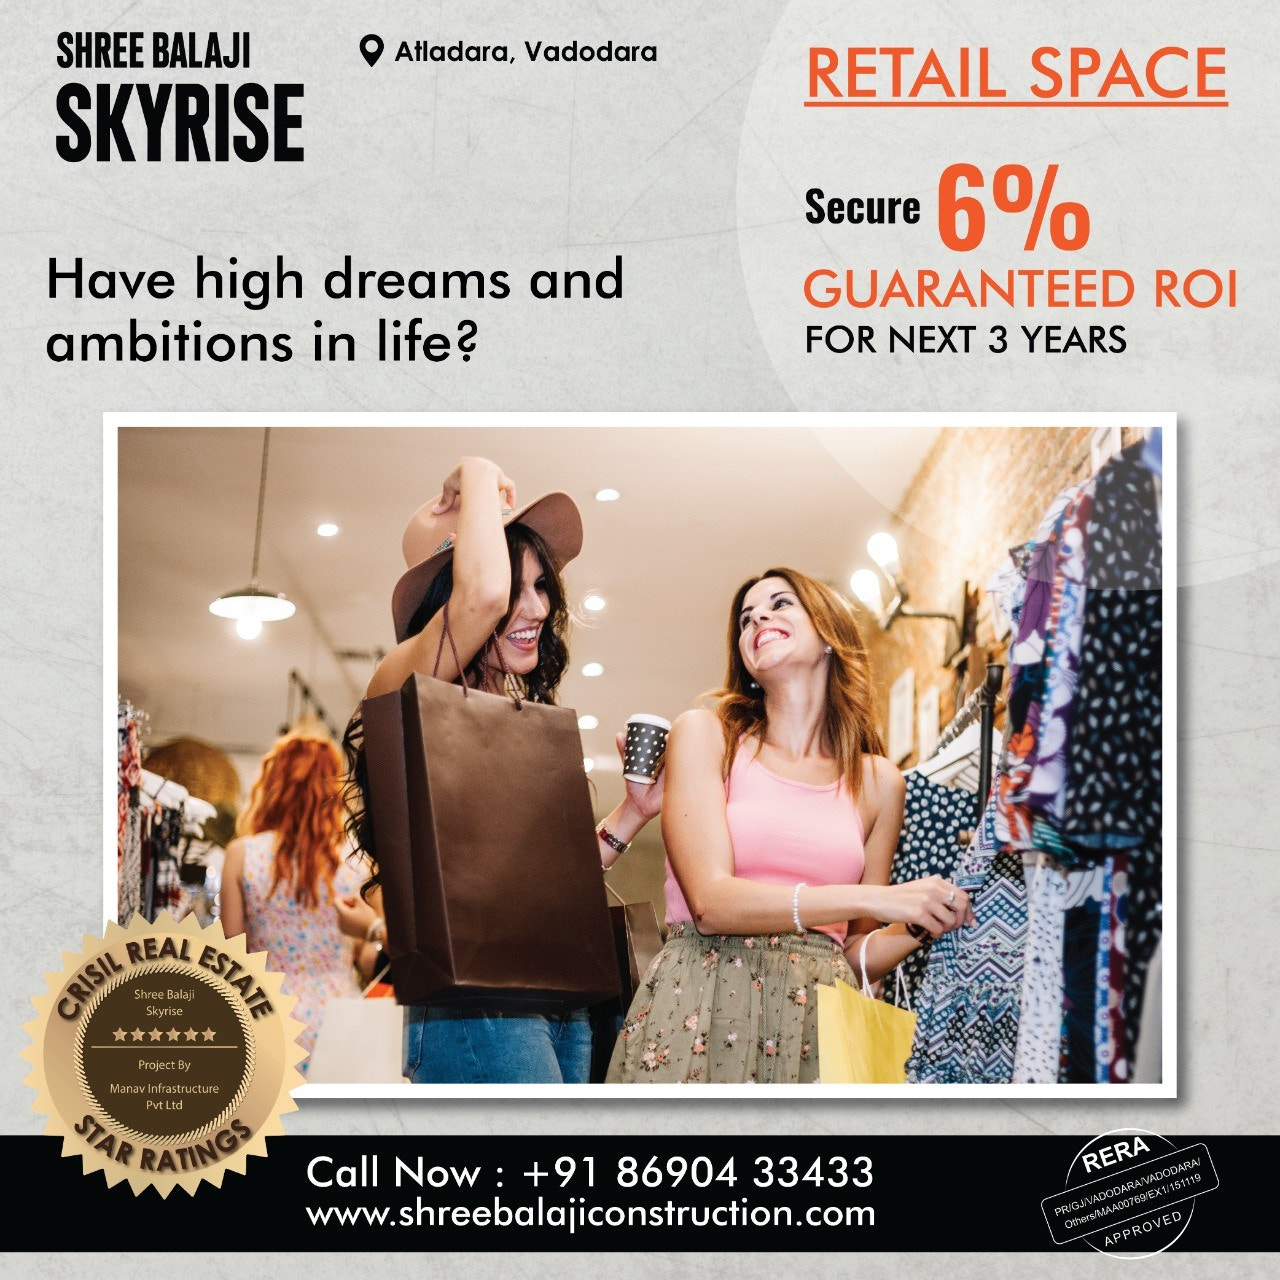 Achieve your dreams and ambitions here with the best retail hub here